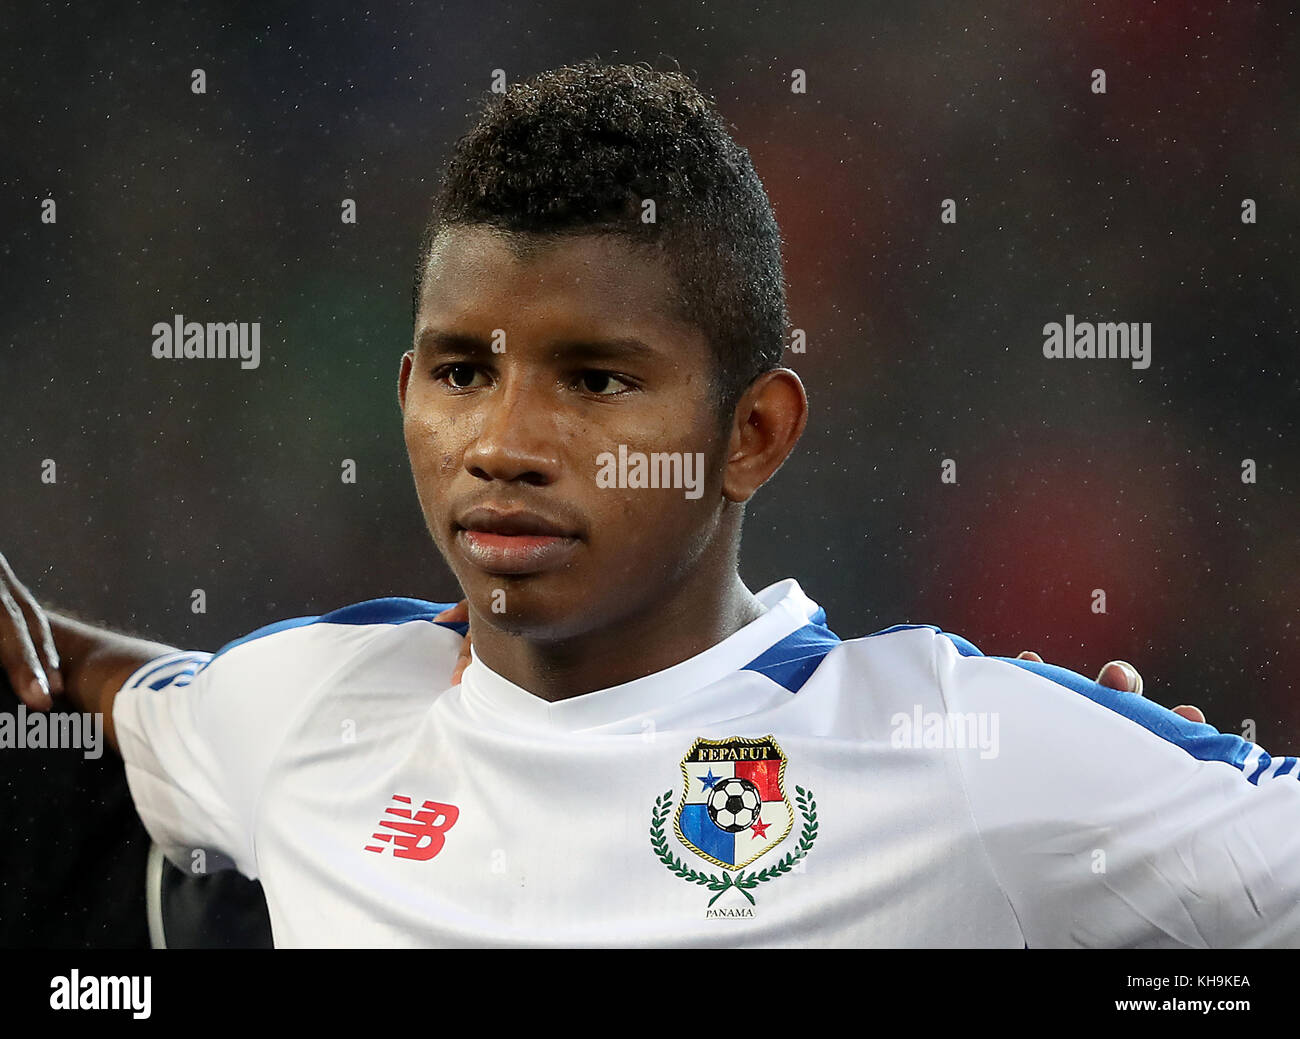 Panama's Fidel Escobar during the International Friendly match at the Cardiff City Stadium. PRESS ASSOCIATION Photo. Picture date: Tuesday November 14, 2017 Stock Photo